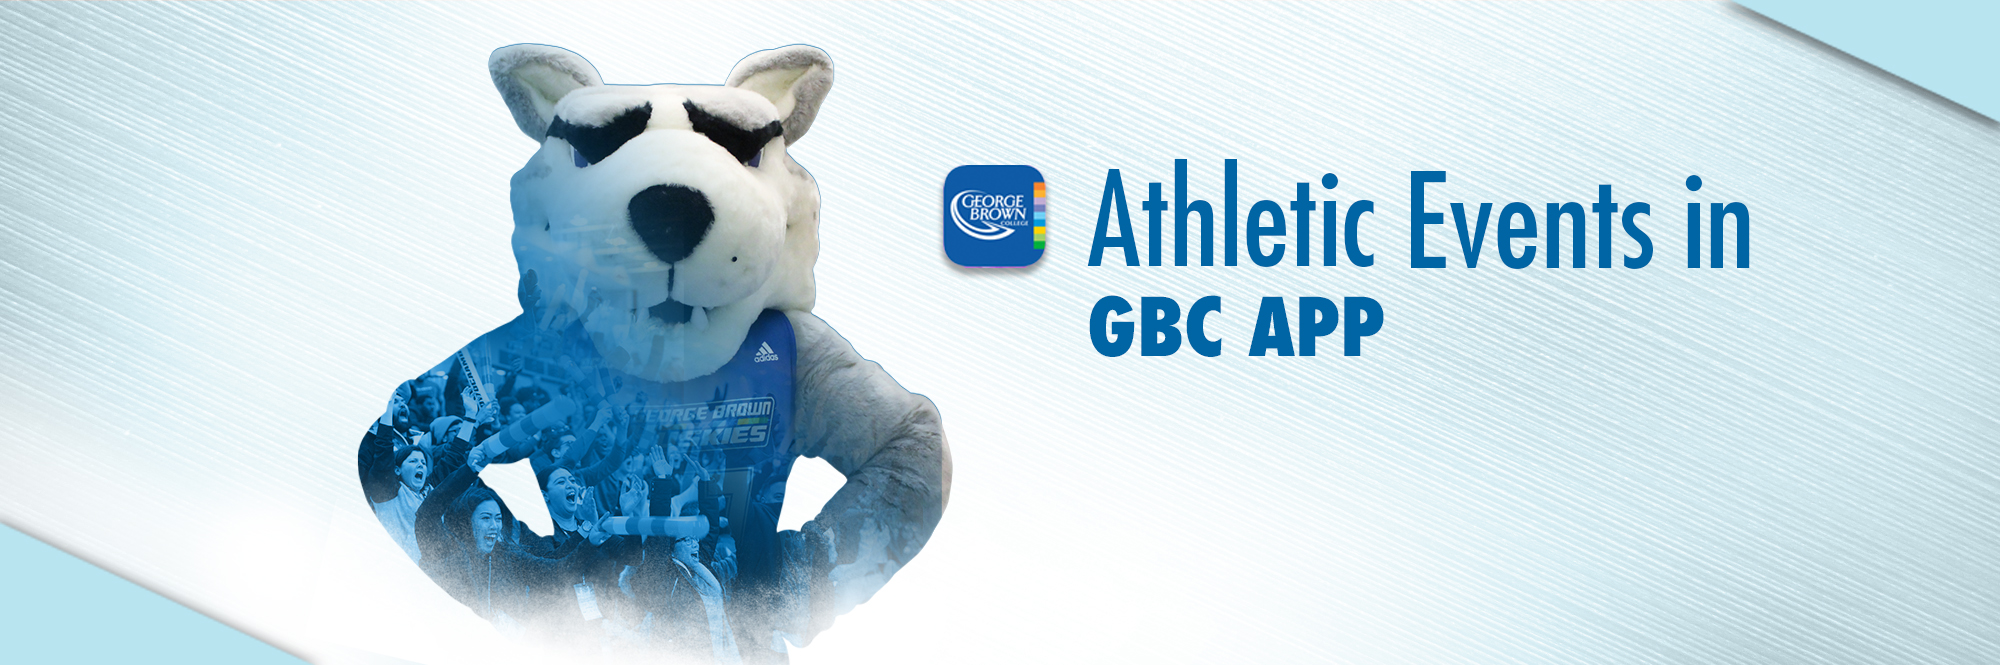 CONNECT WITH HUSKIES ATHLETICS IN THE GBC APP